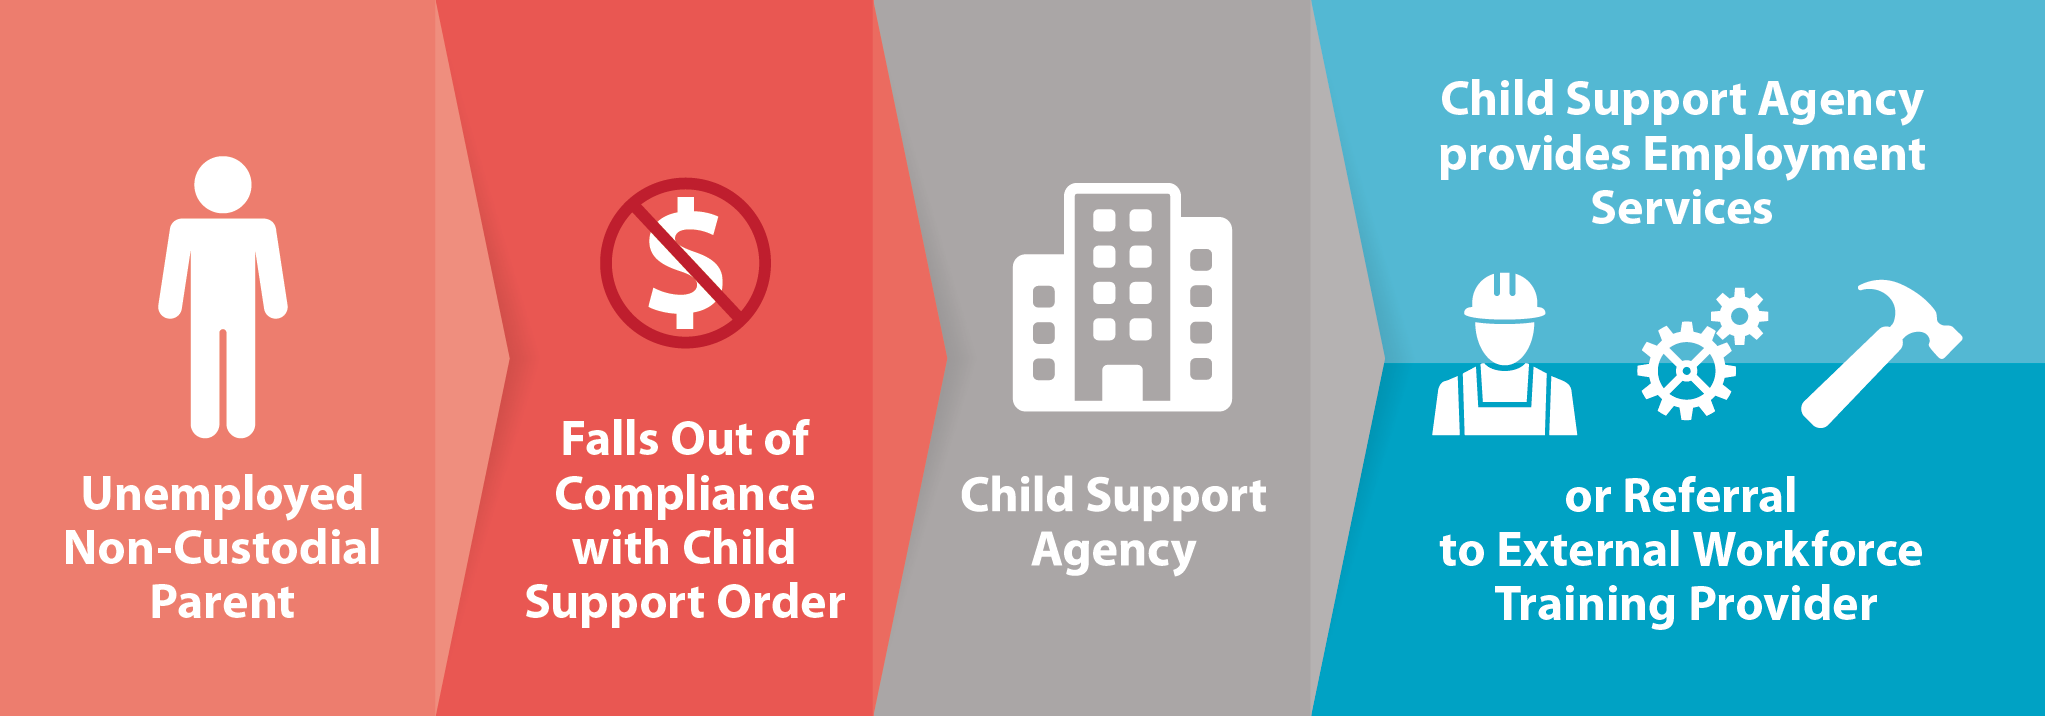 Process of support: 1. Unemployed non-custodial parent falls out of compliance with child support order. 2. Child support agency provides employment services or referral to external workforce training provider.